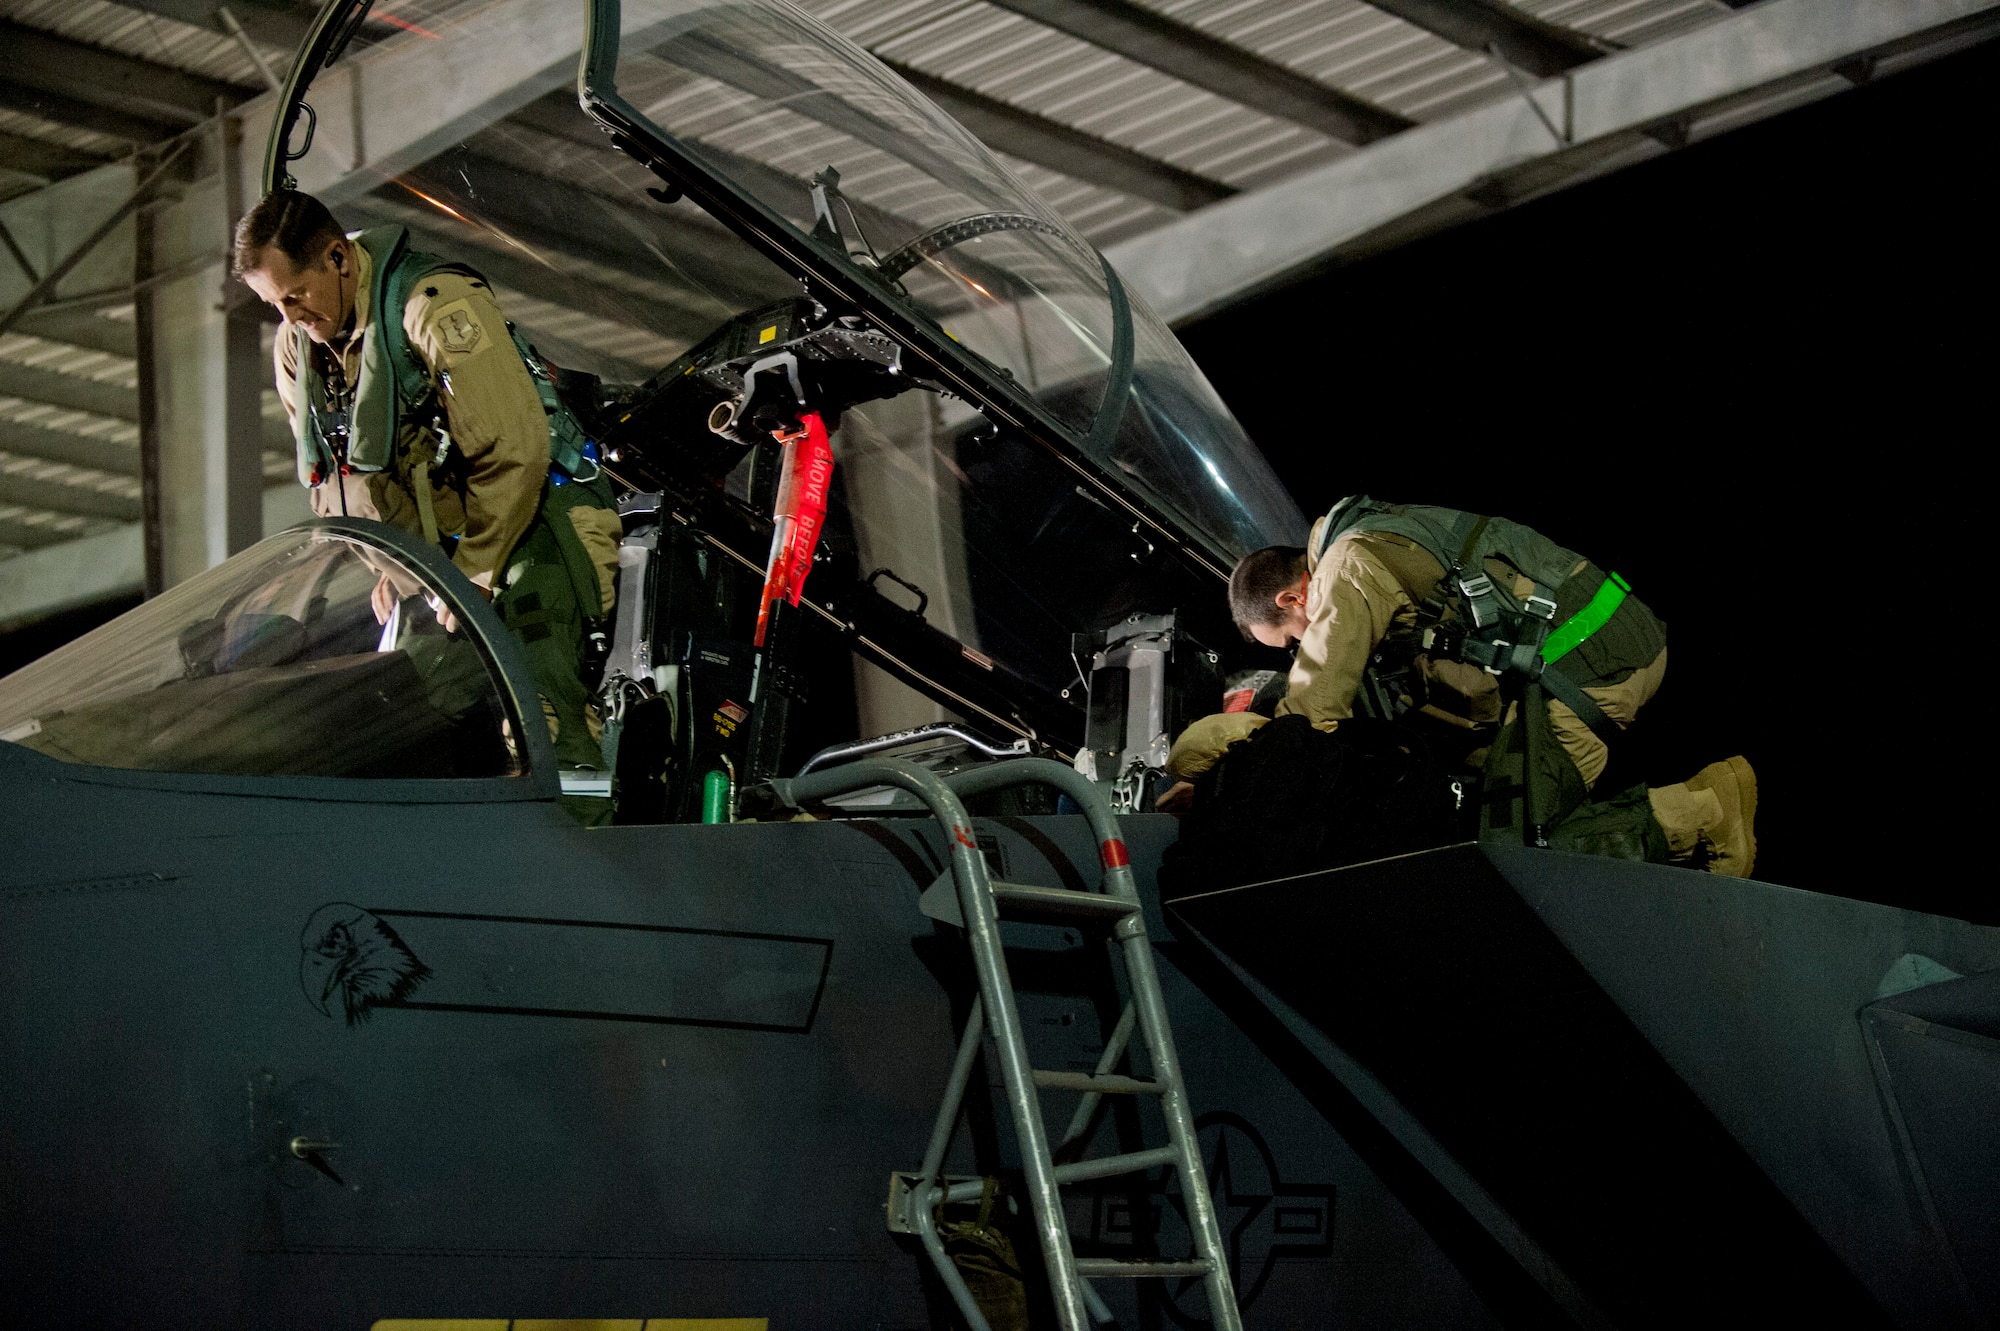 U.S. Air Force Lt. Col. Aaron Meyers, 389th Fighter Squadron commander, and Capt. Craig Sanders, 389th FS chief of mission planning, perform preflight checks in an F-15E Strike Eagle at Mountain Home Air Force Base, Idaho, April 21, 2013. Members from the 389th FS and Aircraft Maintenance Unit deployed to Southwest Asia to conduct combat operations and meet combatant commander requirements. (U.S. Air Force photo/Staff Sgt. Roy Lynch) (Released)